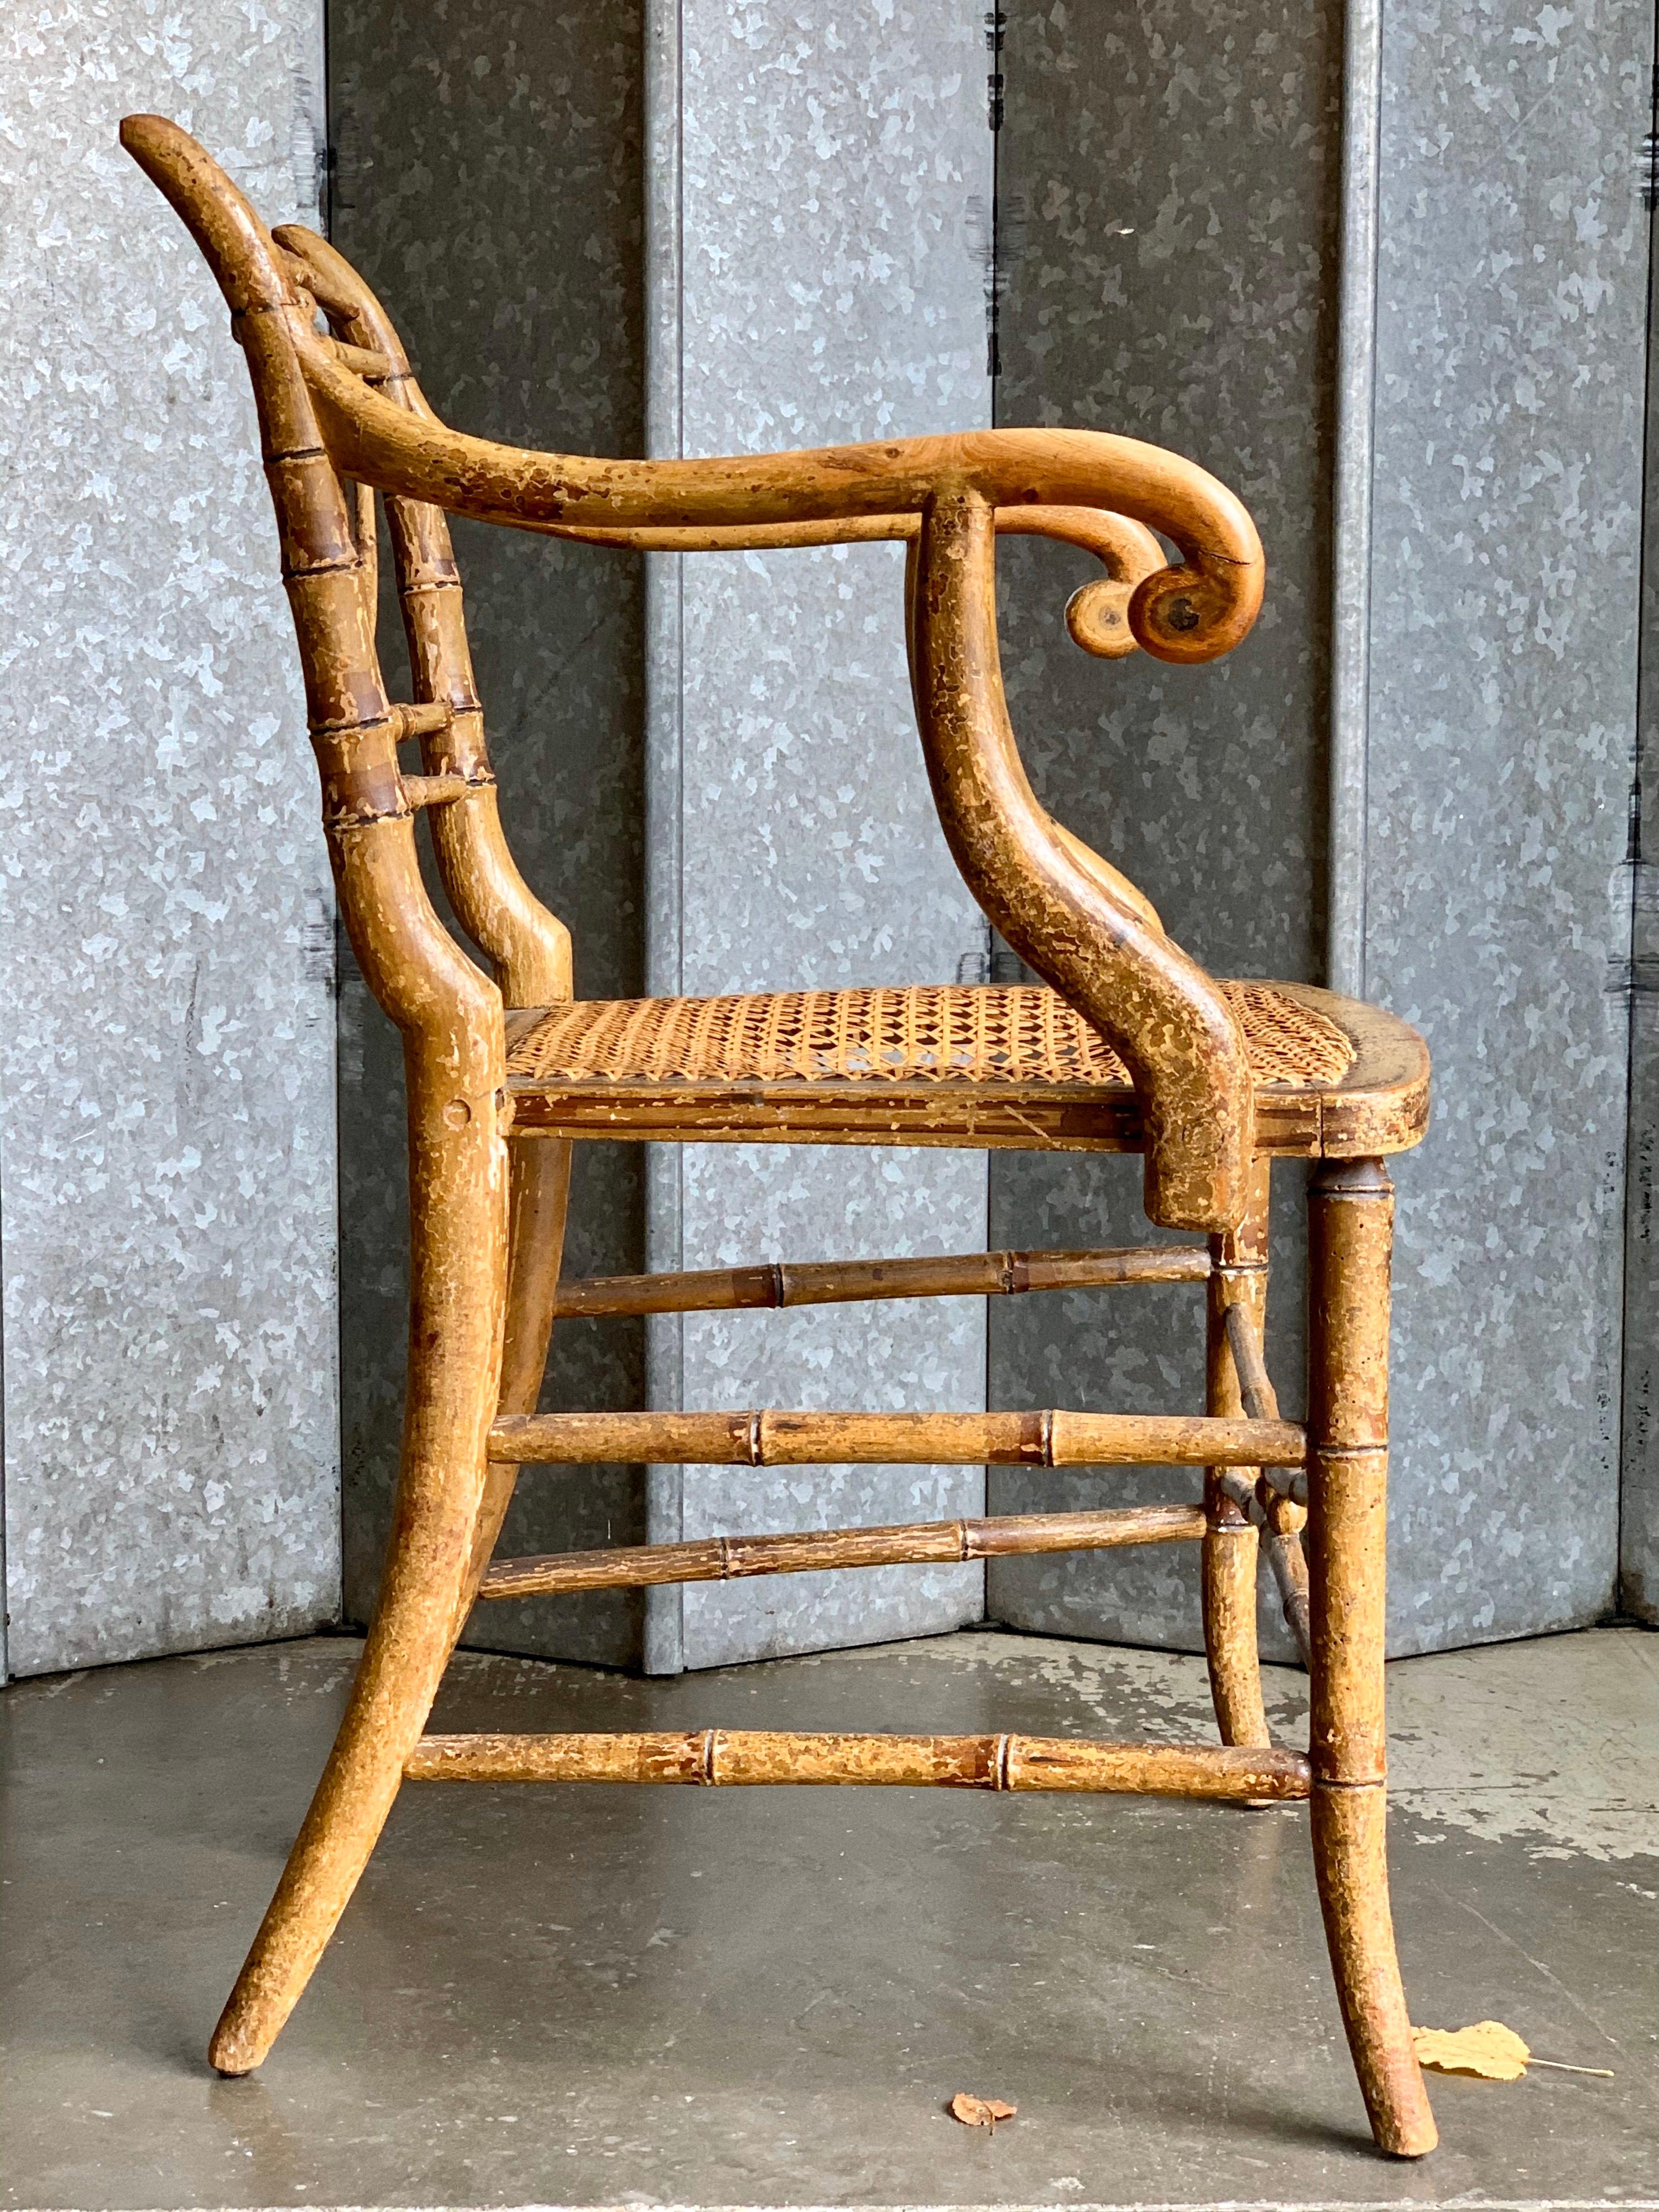 Fine example from the English Regency period of George IV, circa 1810. Features remnants of original paint on beech frame, completely unrestored condition. All joints firm with no issues. Patina sheen to arms.